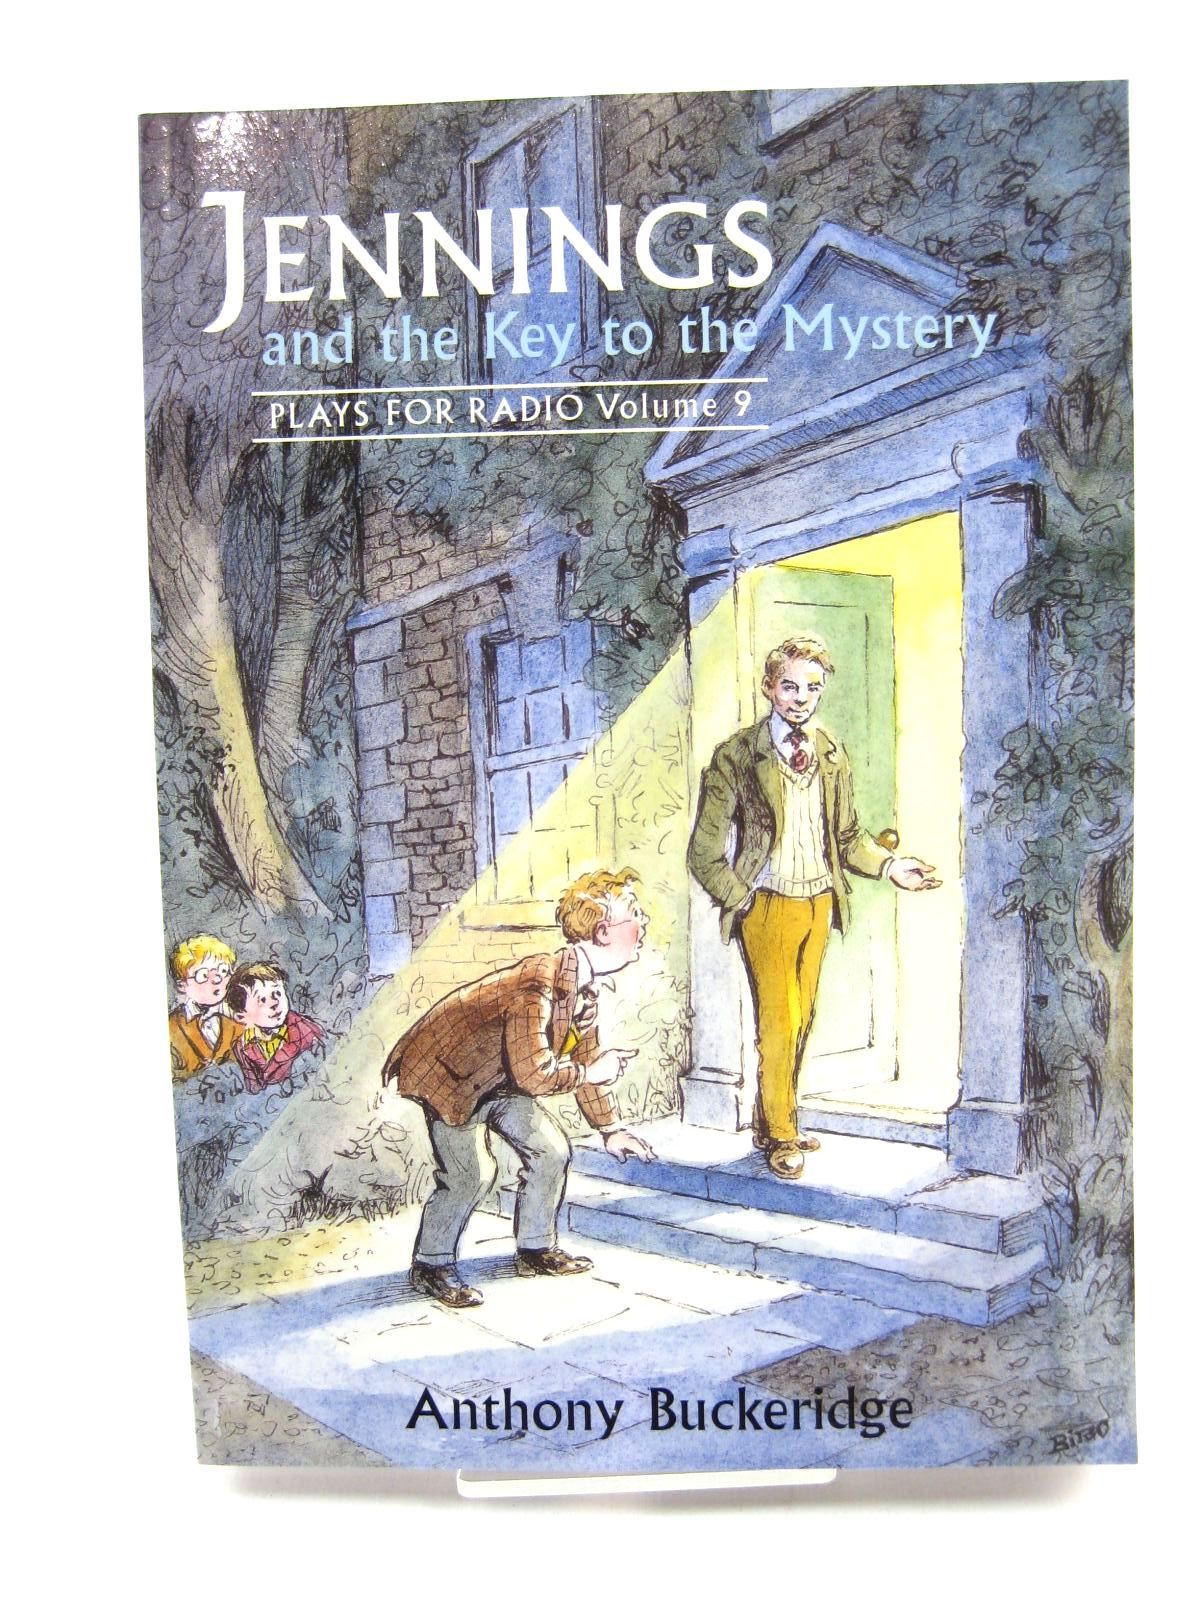 Cover of JENNINGS AND THE KEY TO THE MYSTERY by Anthony Buckeridge